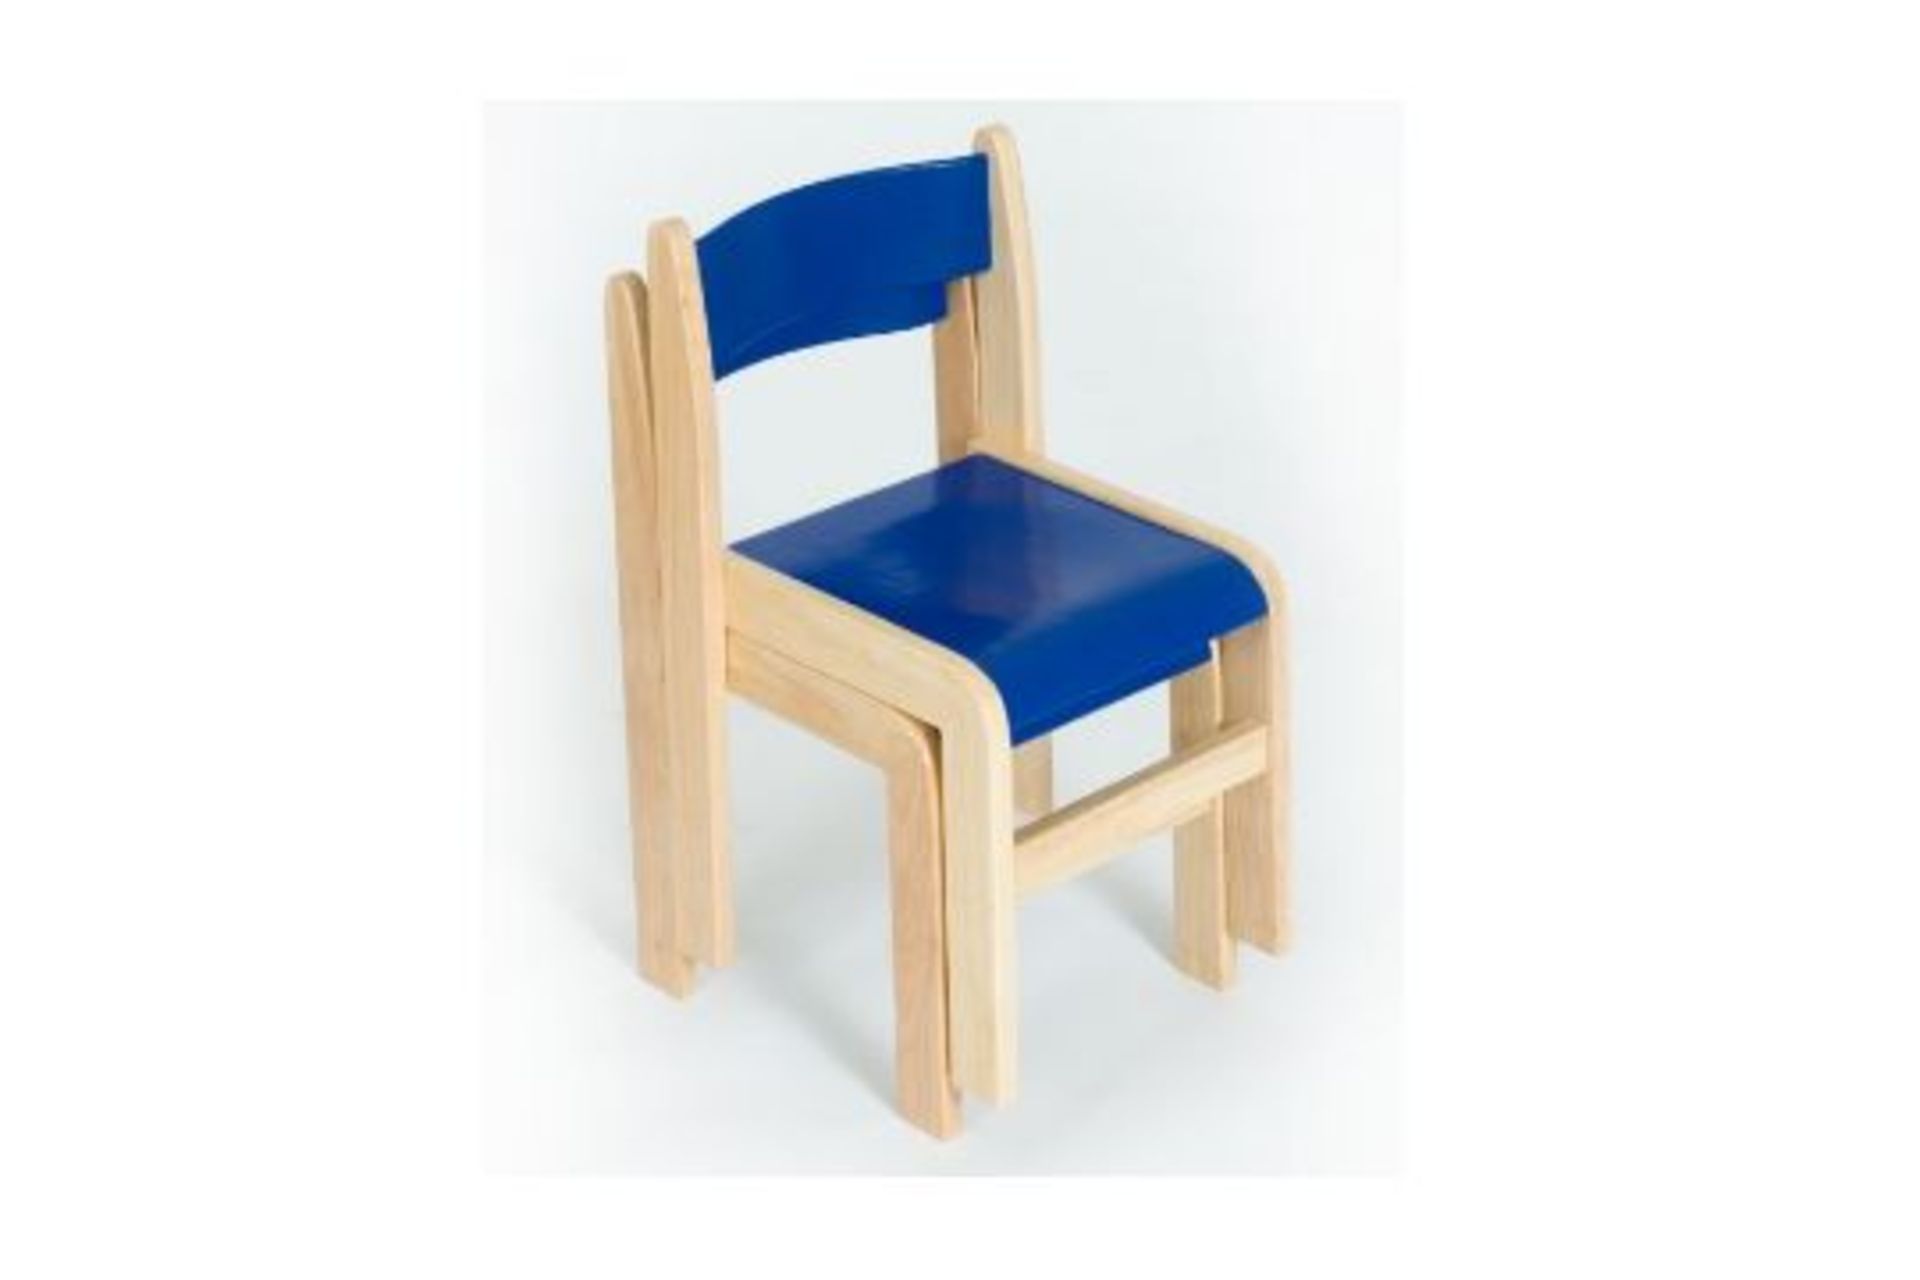 3 x Sets of 2 Tuf Class Wooden Chair Blue. RRP £175 per set, total RRP £525. FN0003-2 : Size 2 :